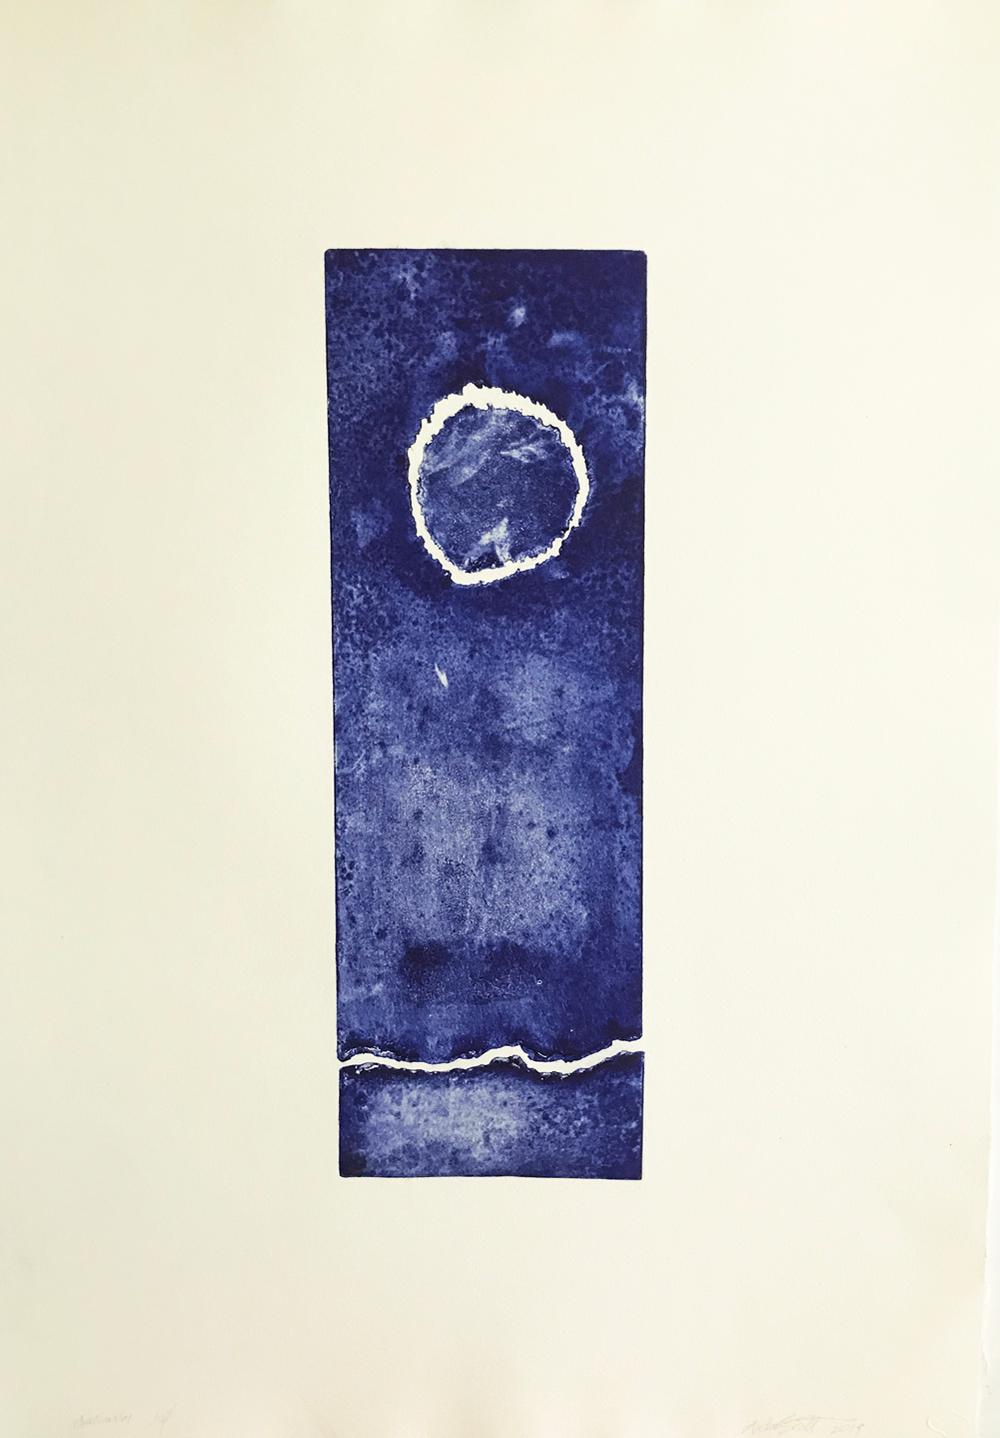 Arden Scott Abstract Print - "Continuum 2", ultramarine blue abstract seascape inspired engraving print.